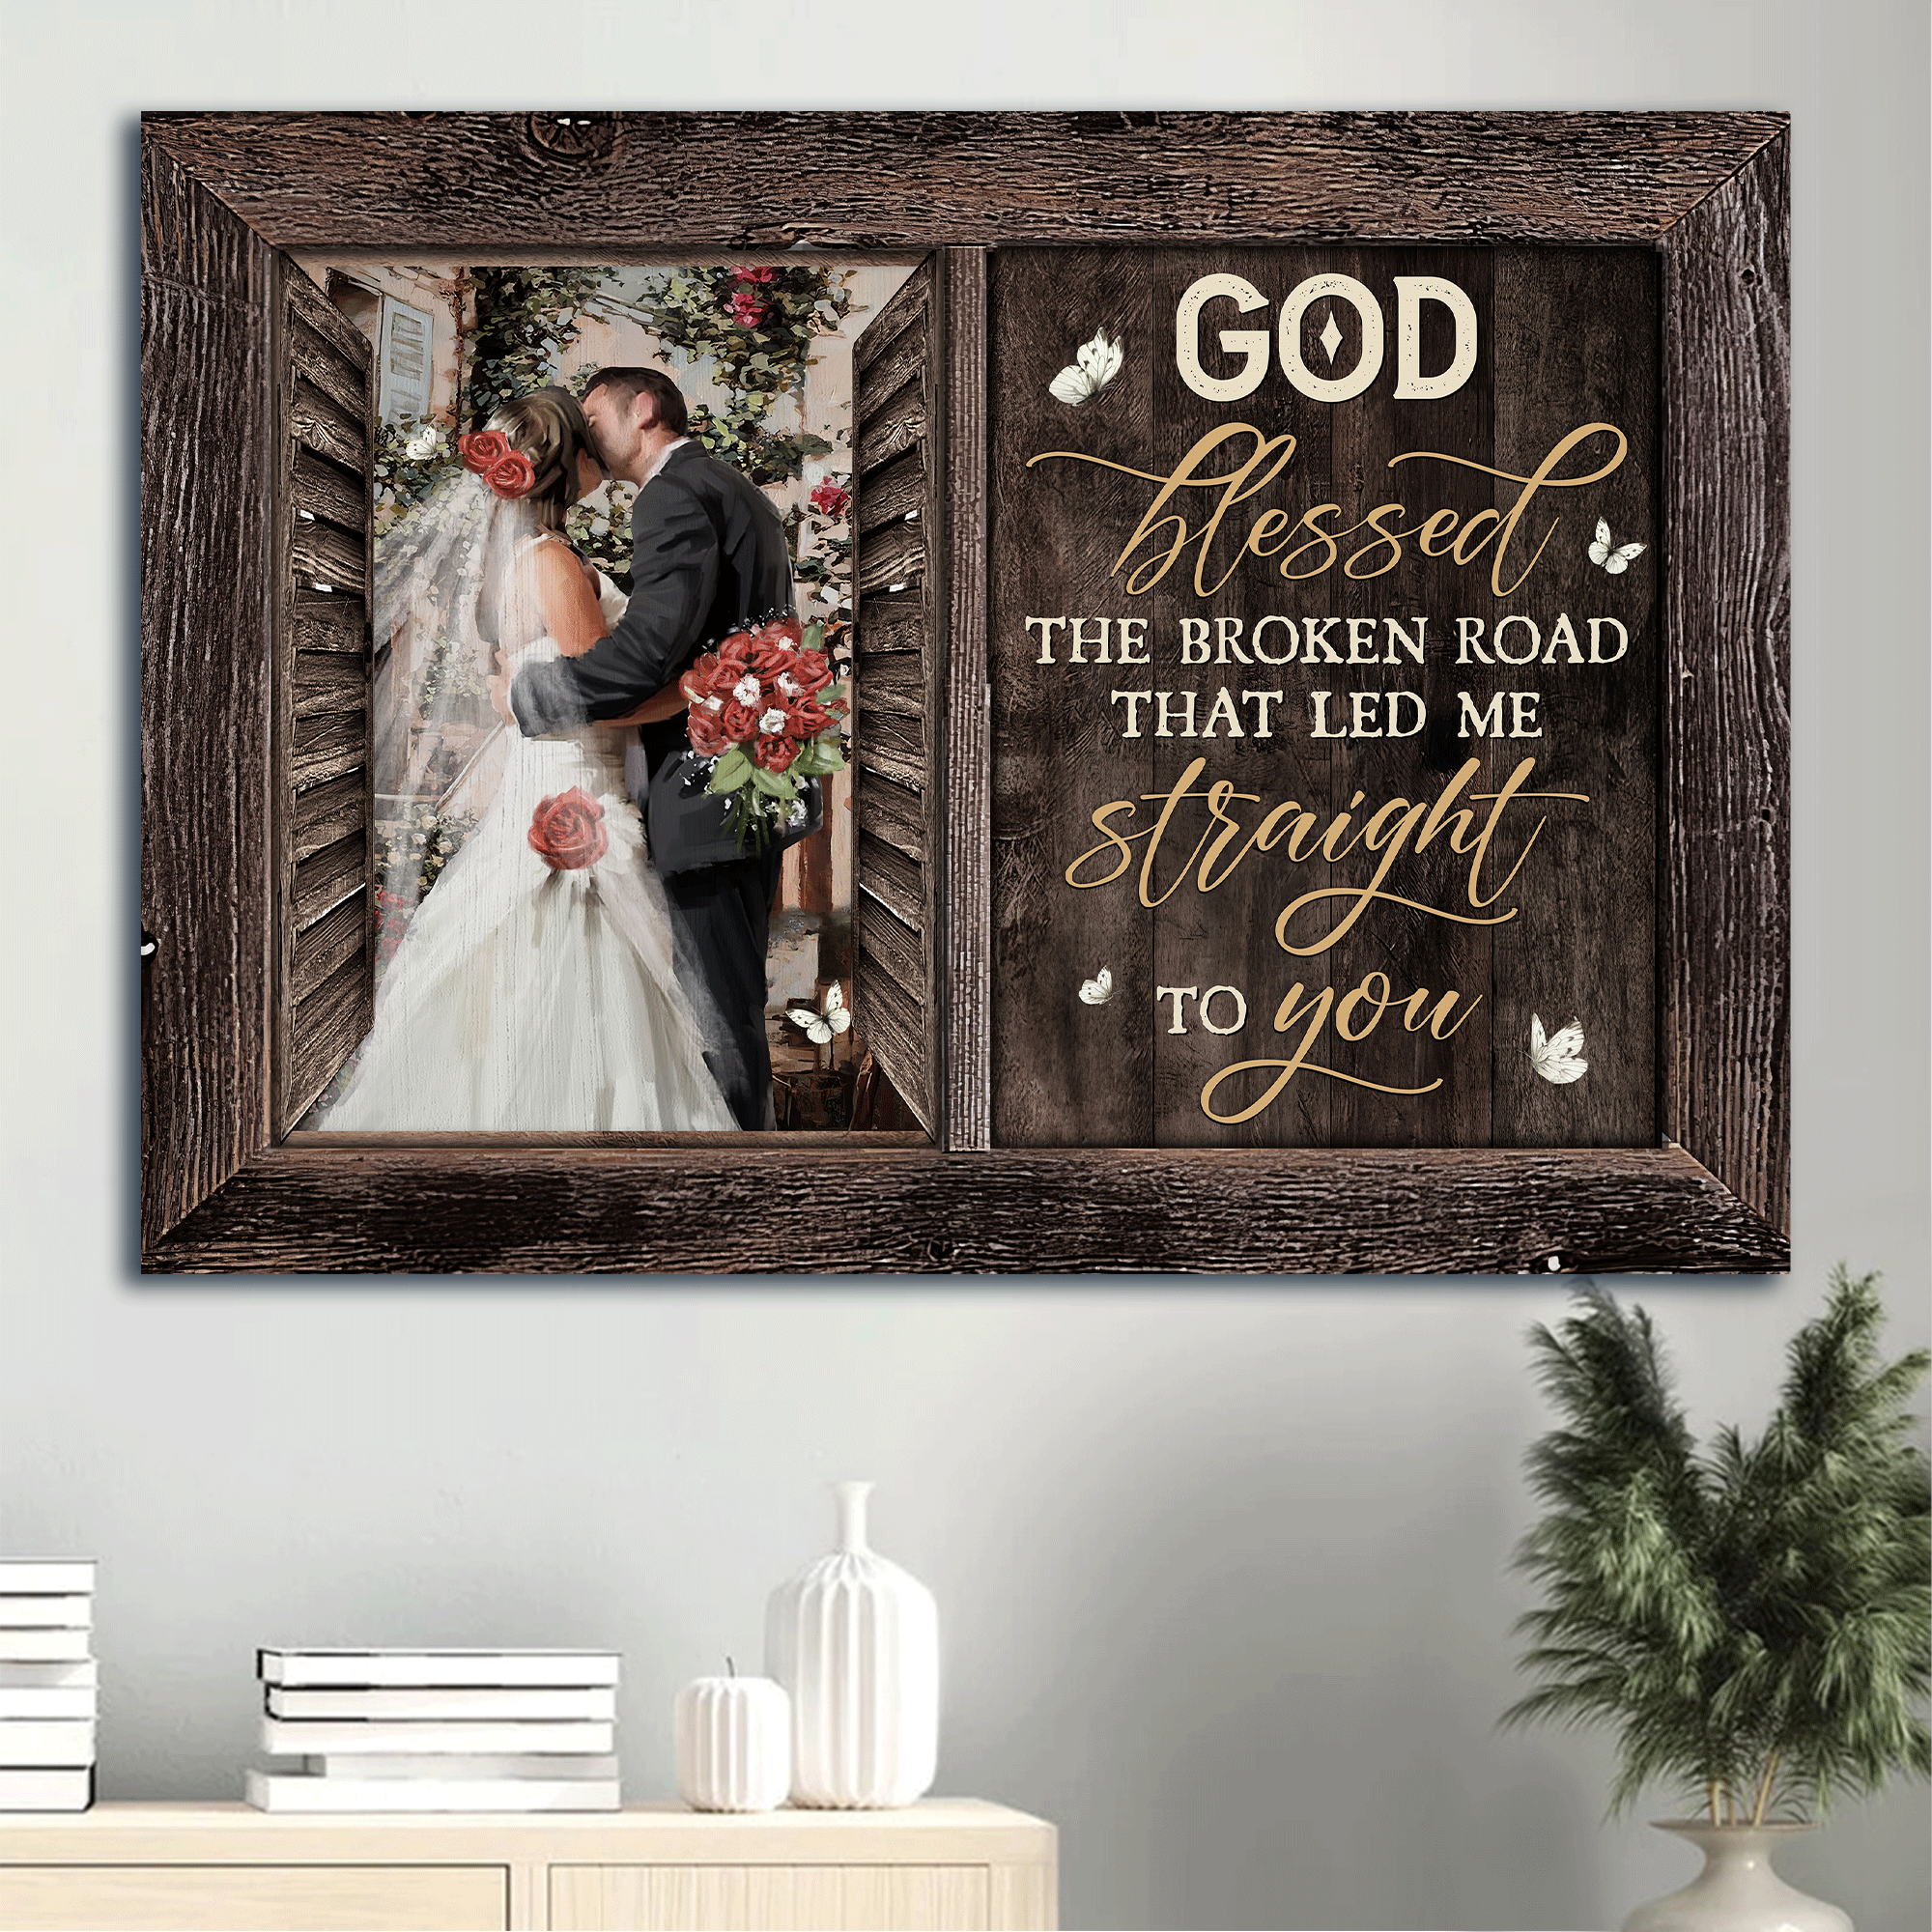 Jesus Landscape Canvas - Beautiful couple, Happy wedding, Red rose Landscape Canvas - Gift For Christian - God blessed the broken road